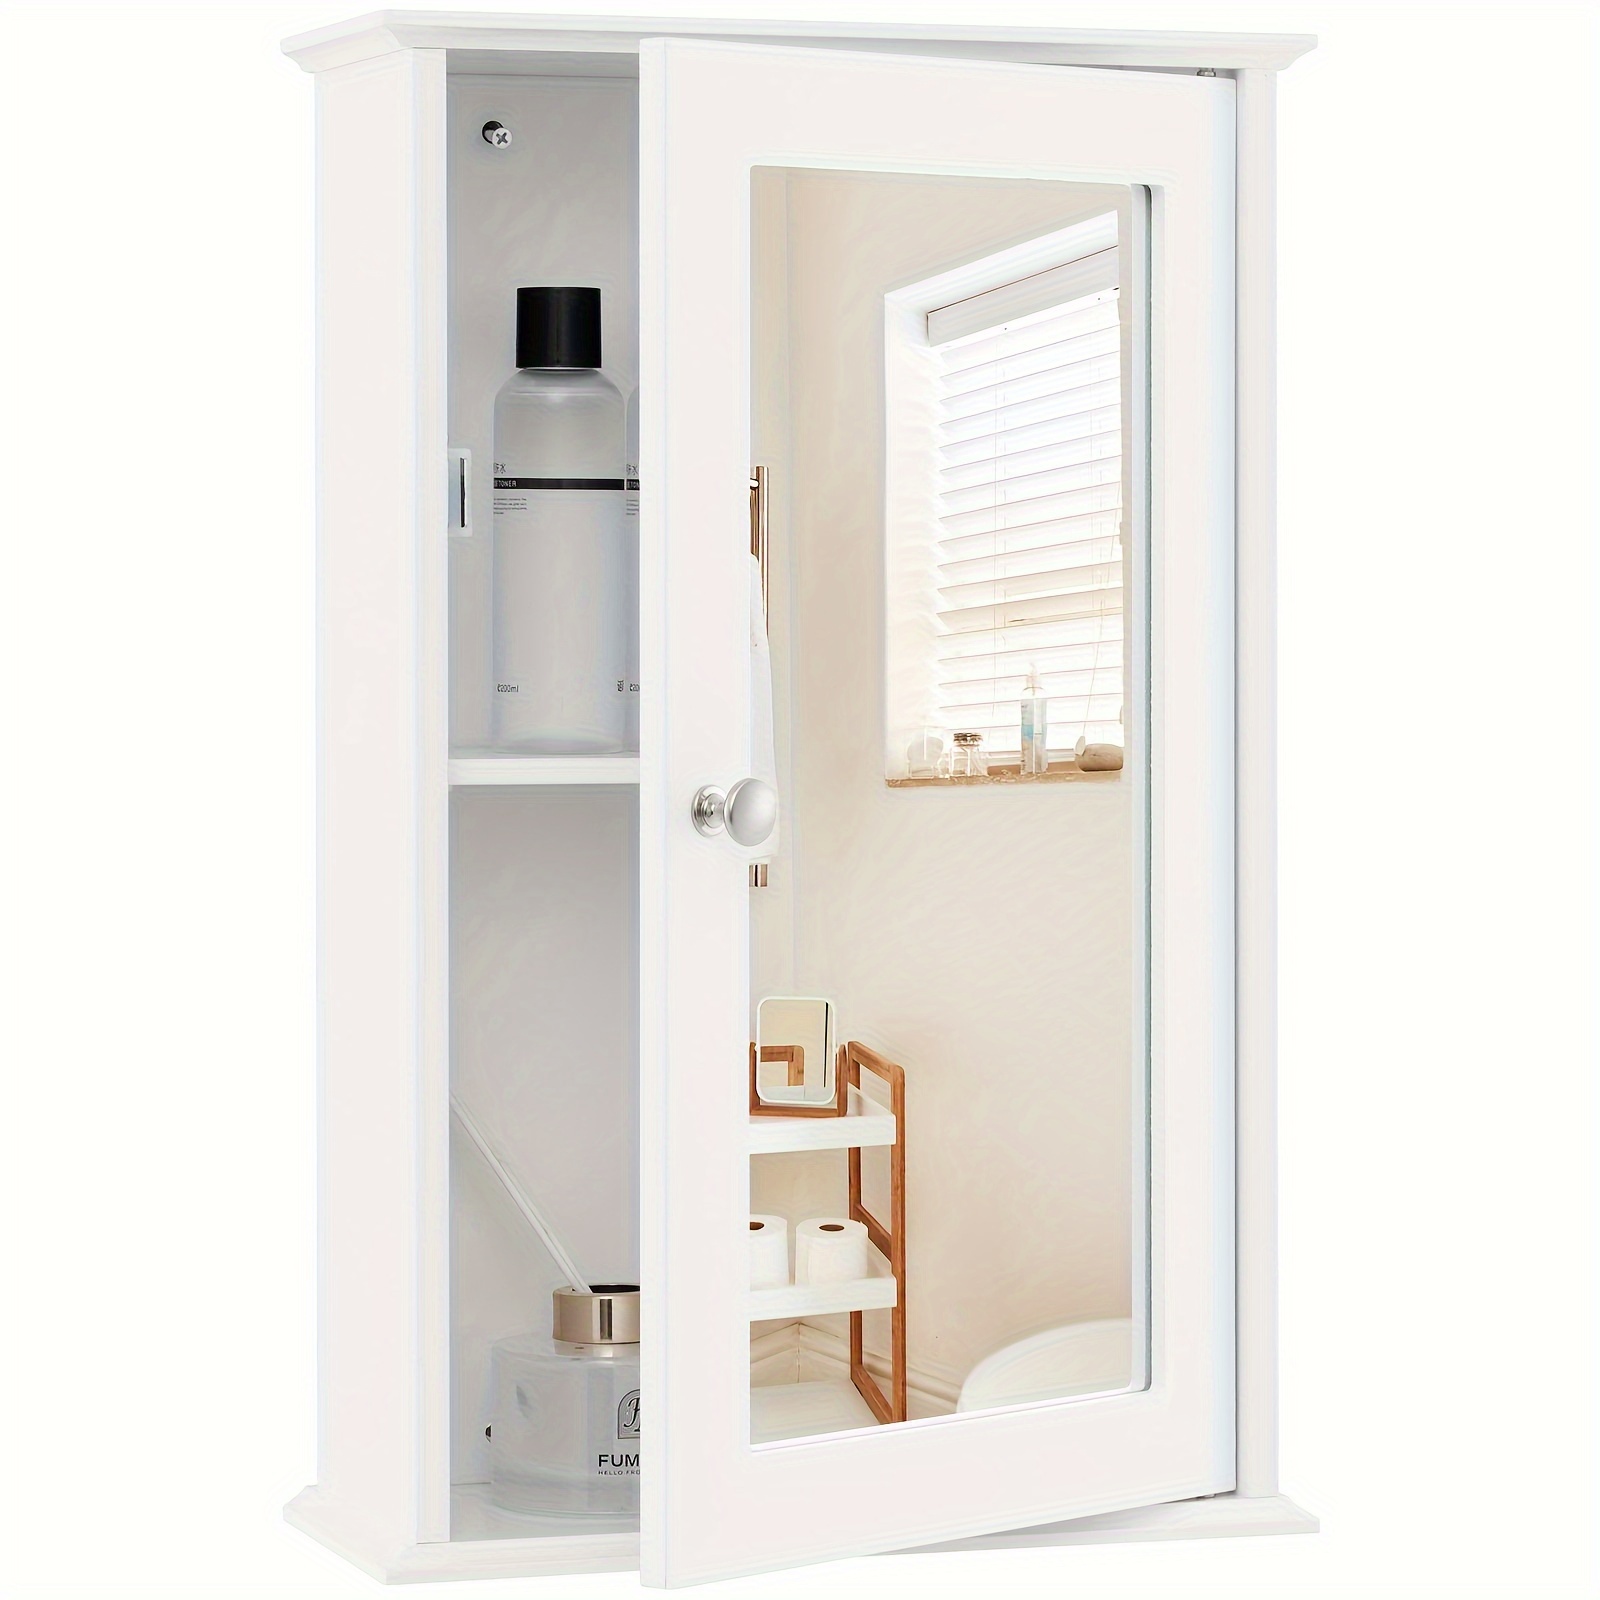 

Giantex Bathroom Medicine Cabinet With Mirror, Wall Mounted Storage Cabinet With Reversible Single Mirrored Door And Adjustable Shelf For Living Room Or Entryway (white)